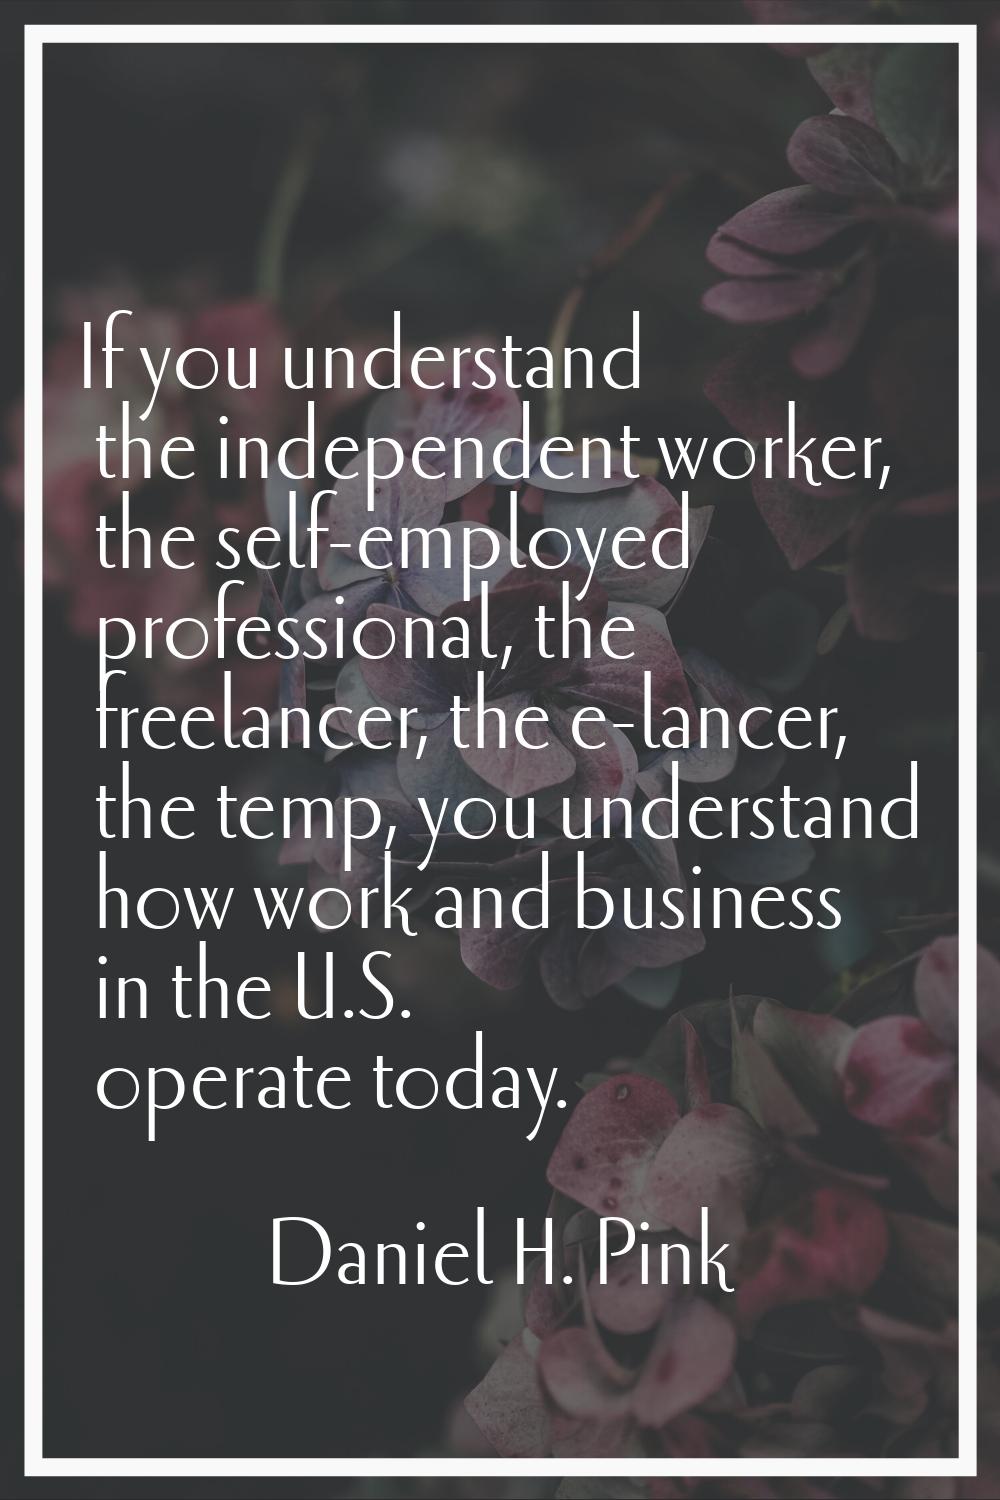 If you understand the independent worker, the self-employed professional, the freelancer, the e-lan